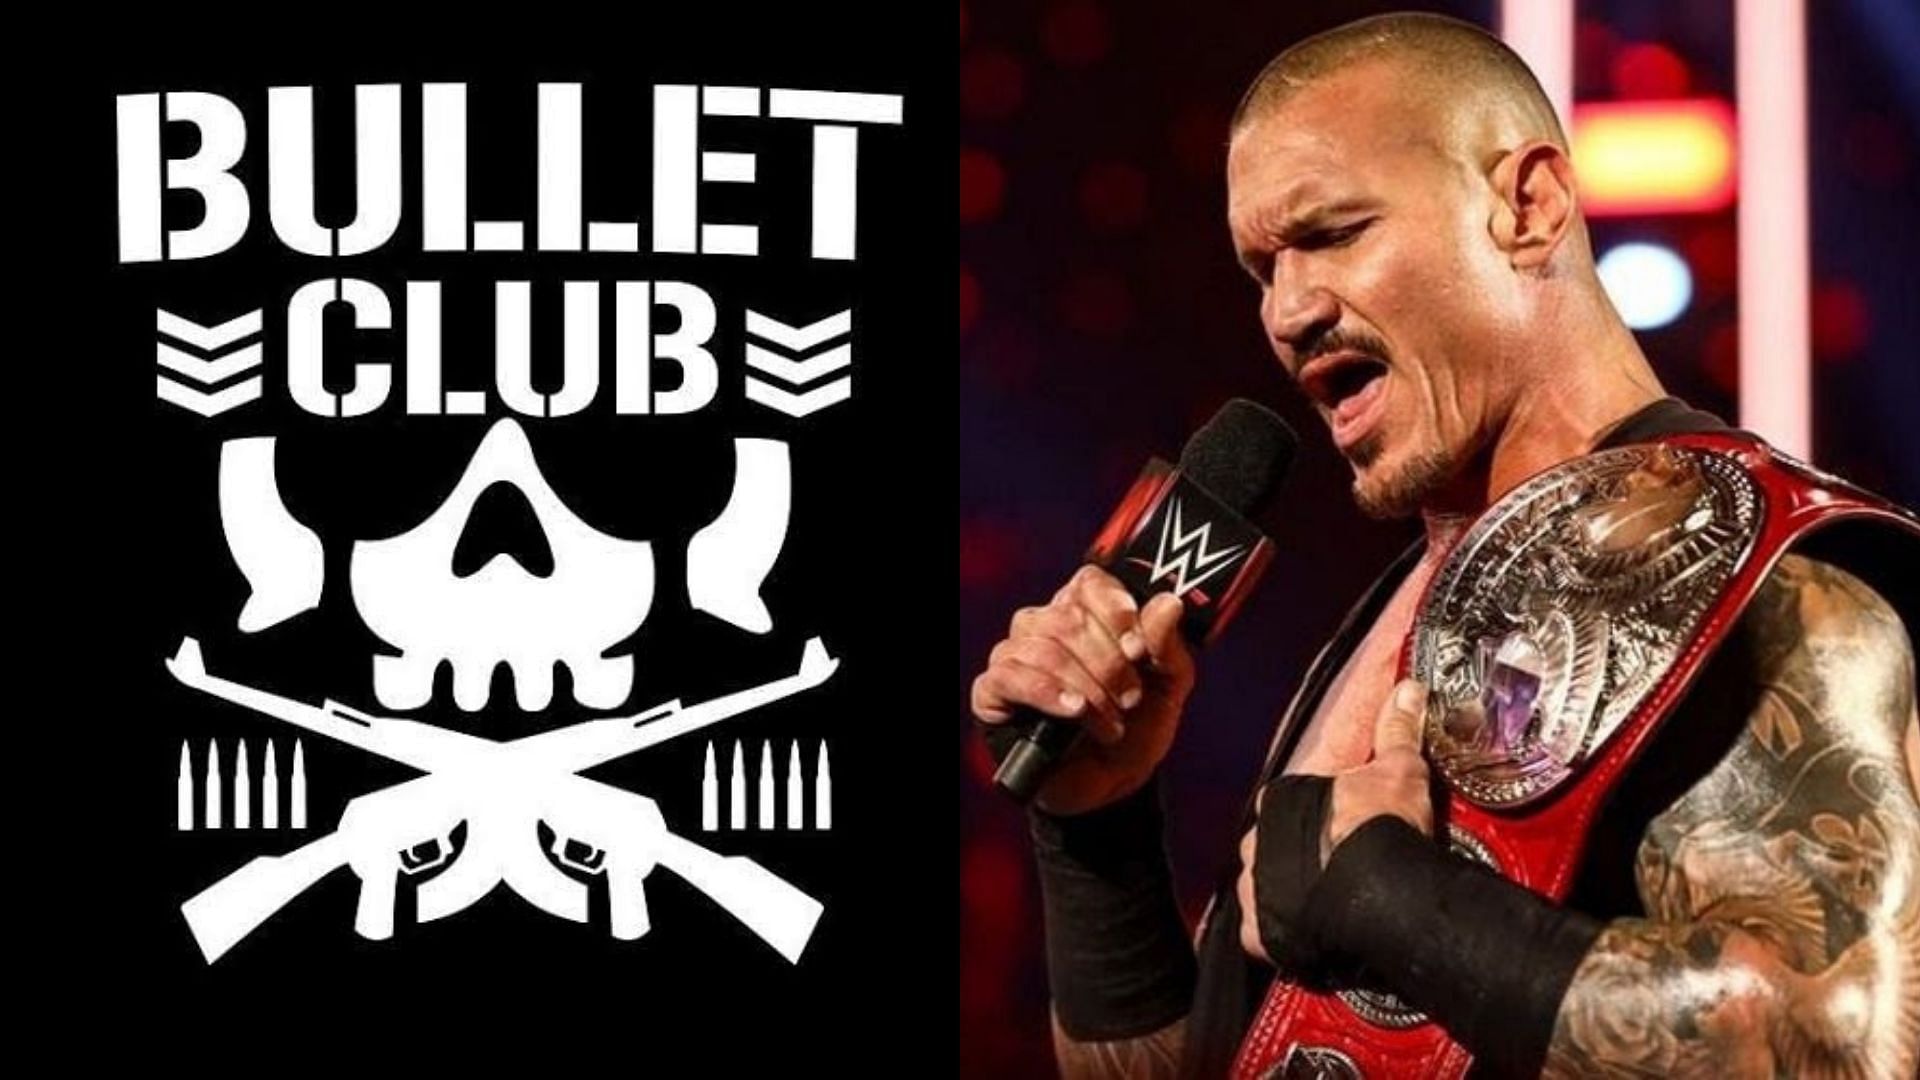 A Bullet Club star has admitted that he would like to face The Viper